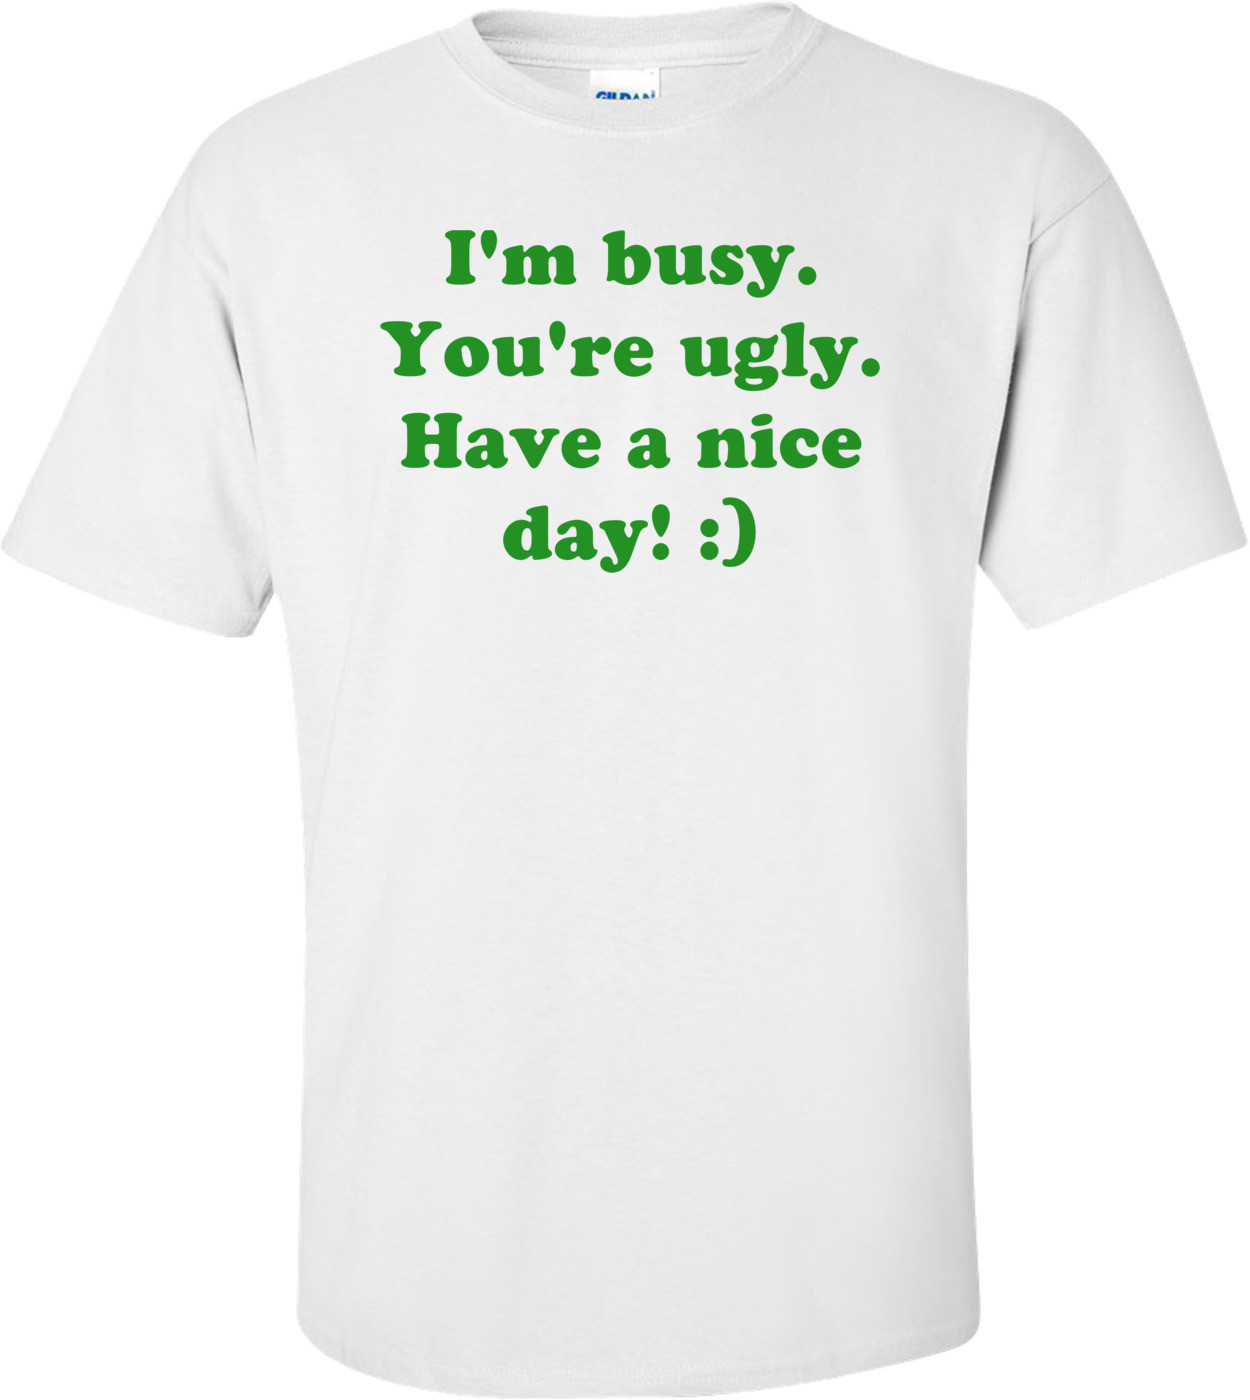 I'm busy. You're ugly. Have a nice day! :)